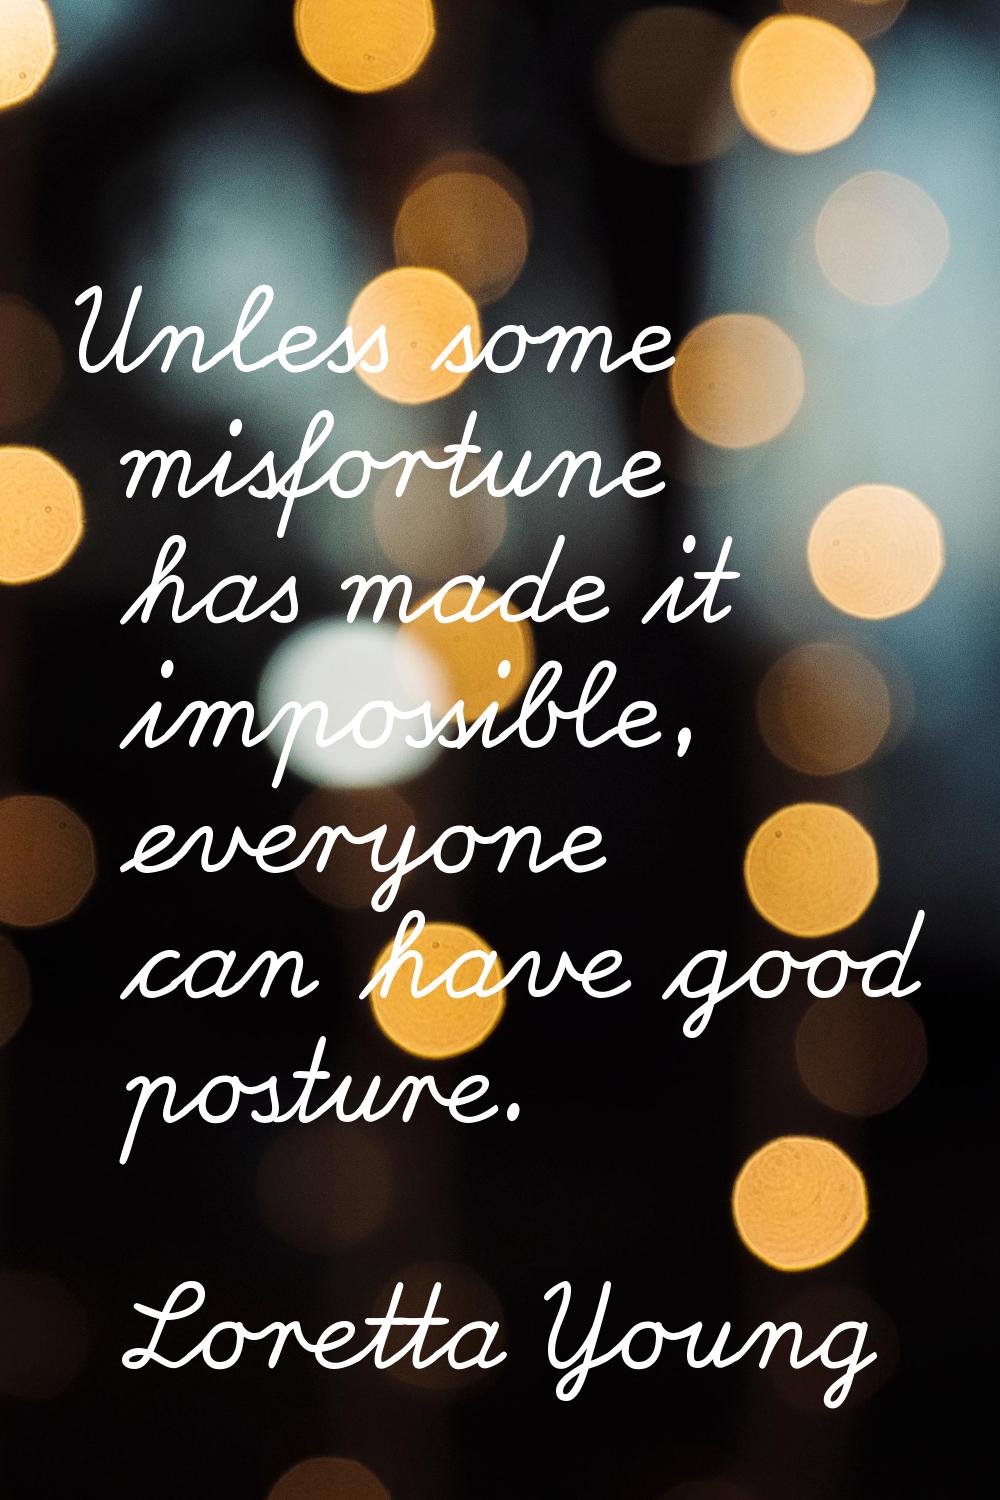 Unless some misfortune has made it impossible, everyone can have good posture.